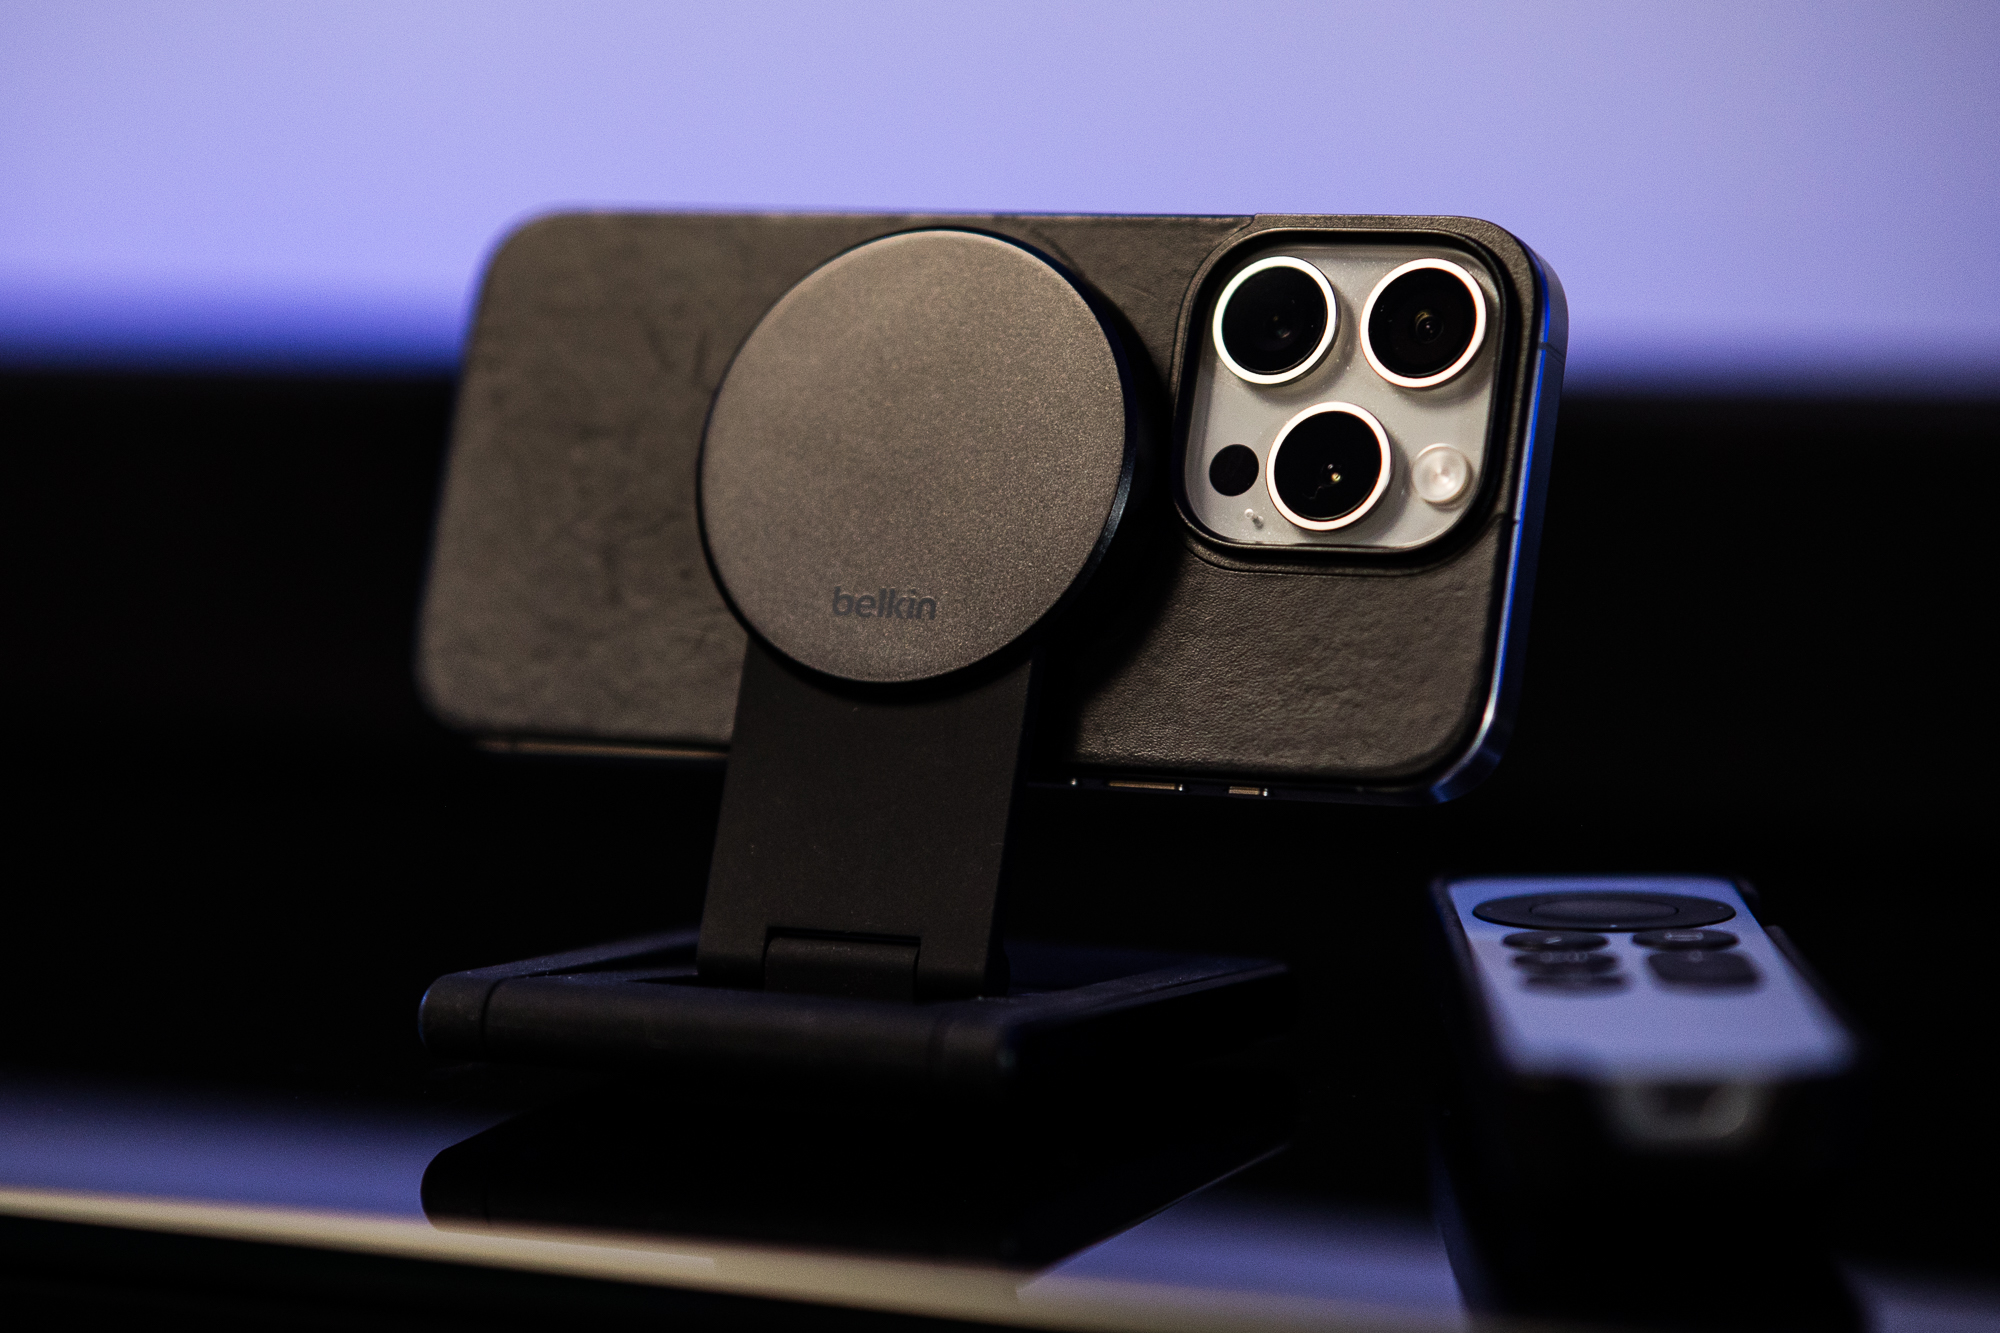 The Belkin iPhone Mount with MagSafe for Apple TV 4K in its stand mode